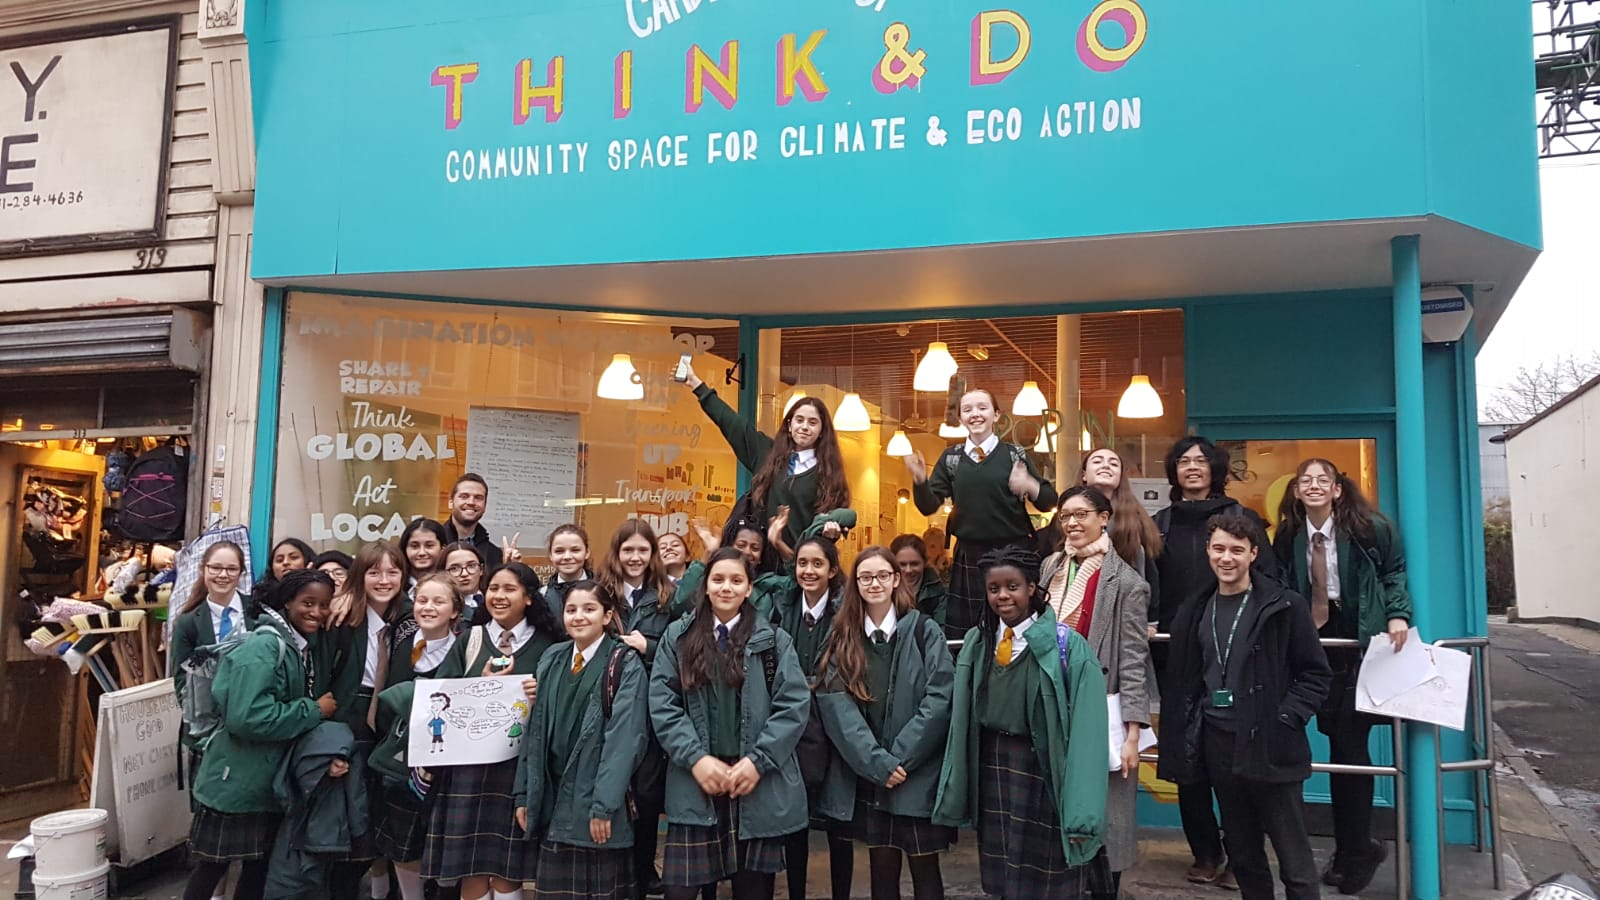 School children outside the original Think & Do pop up shop. The sign reads: "Camden Think & Do: community space for climate and eco action"